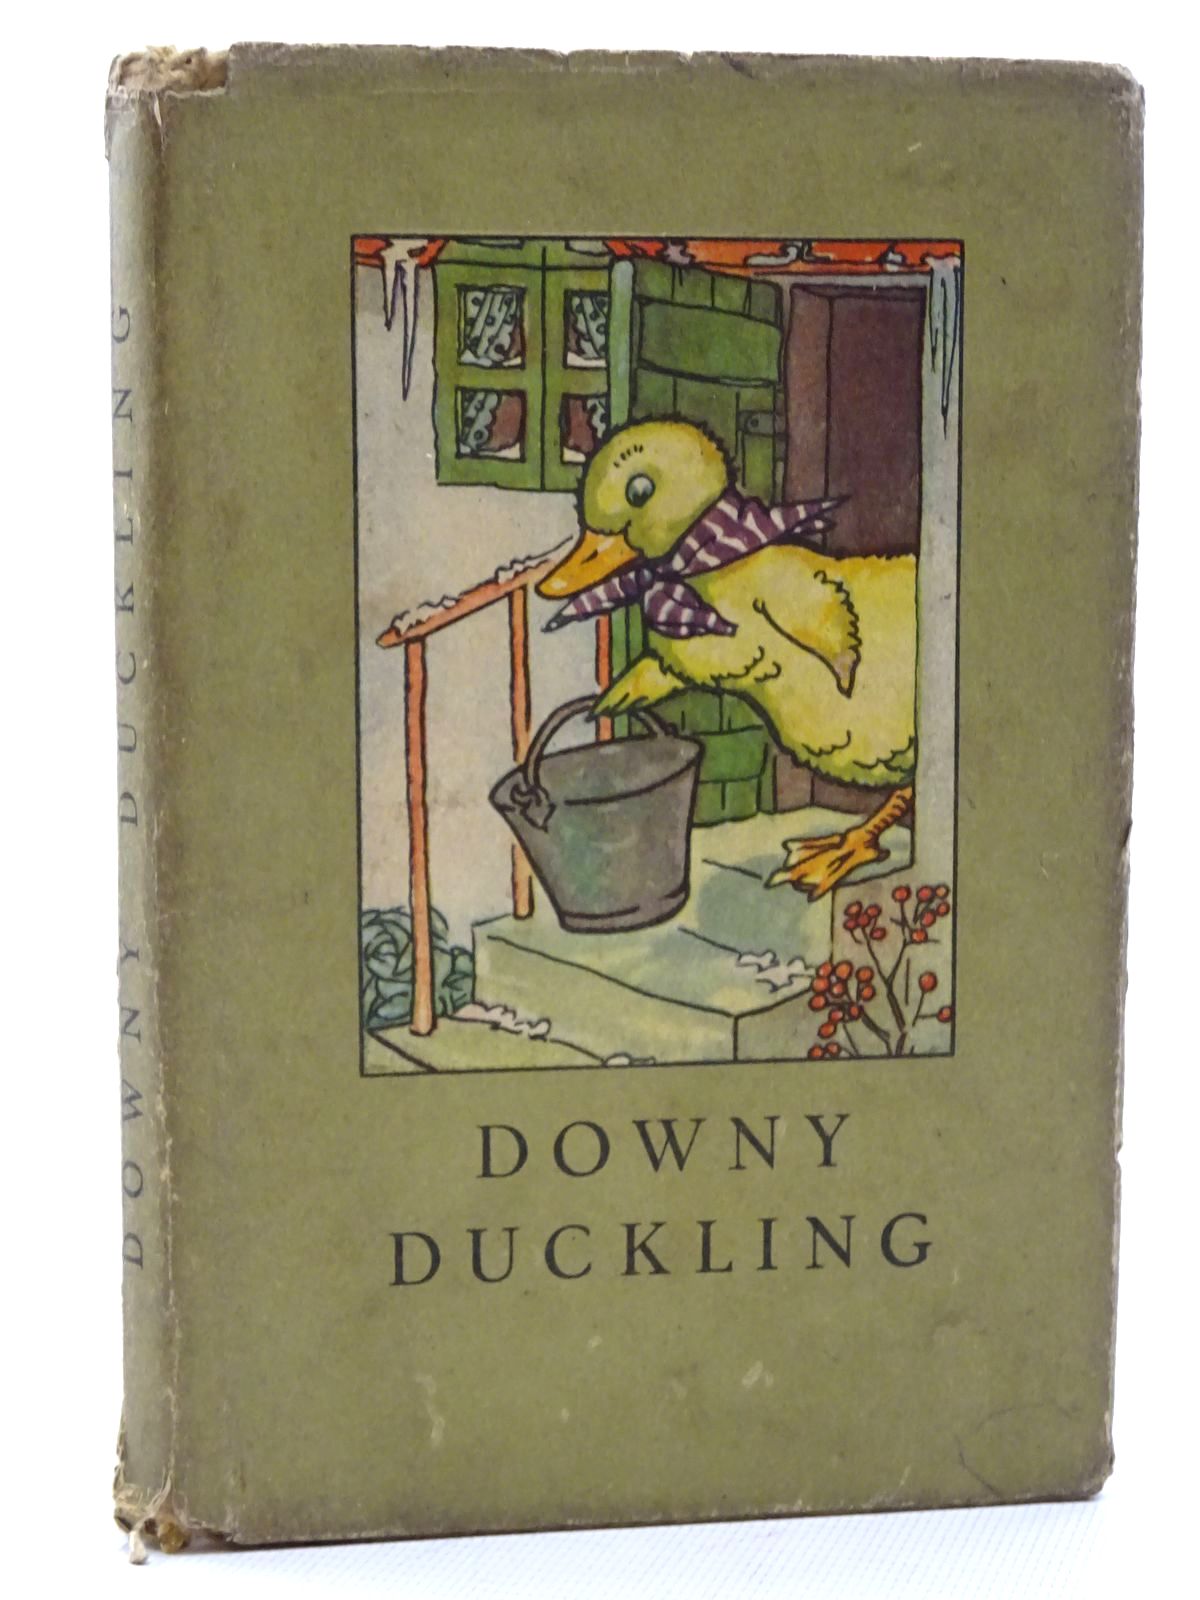 Photo of DOWNY DUCKLING written by Macgregor, A.J.
Perring, W. illustrated by Macgregor, A.J. published by Wills & Hepworth Ltd. (STOCK CODE: 1317321)  for sale by Stella & Rose's Books